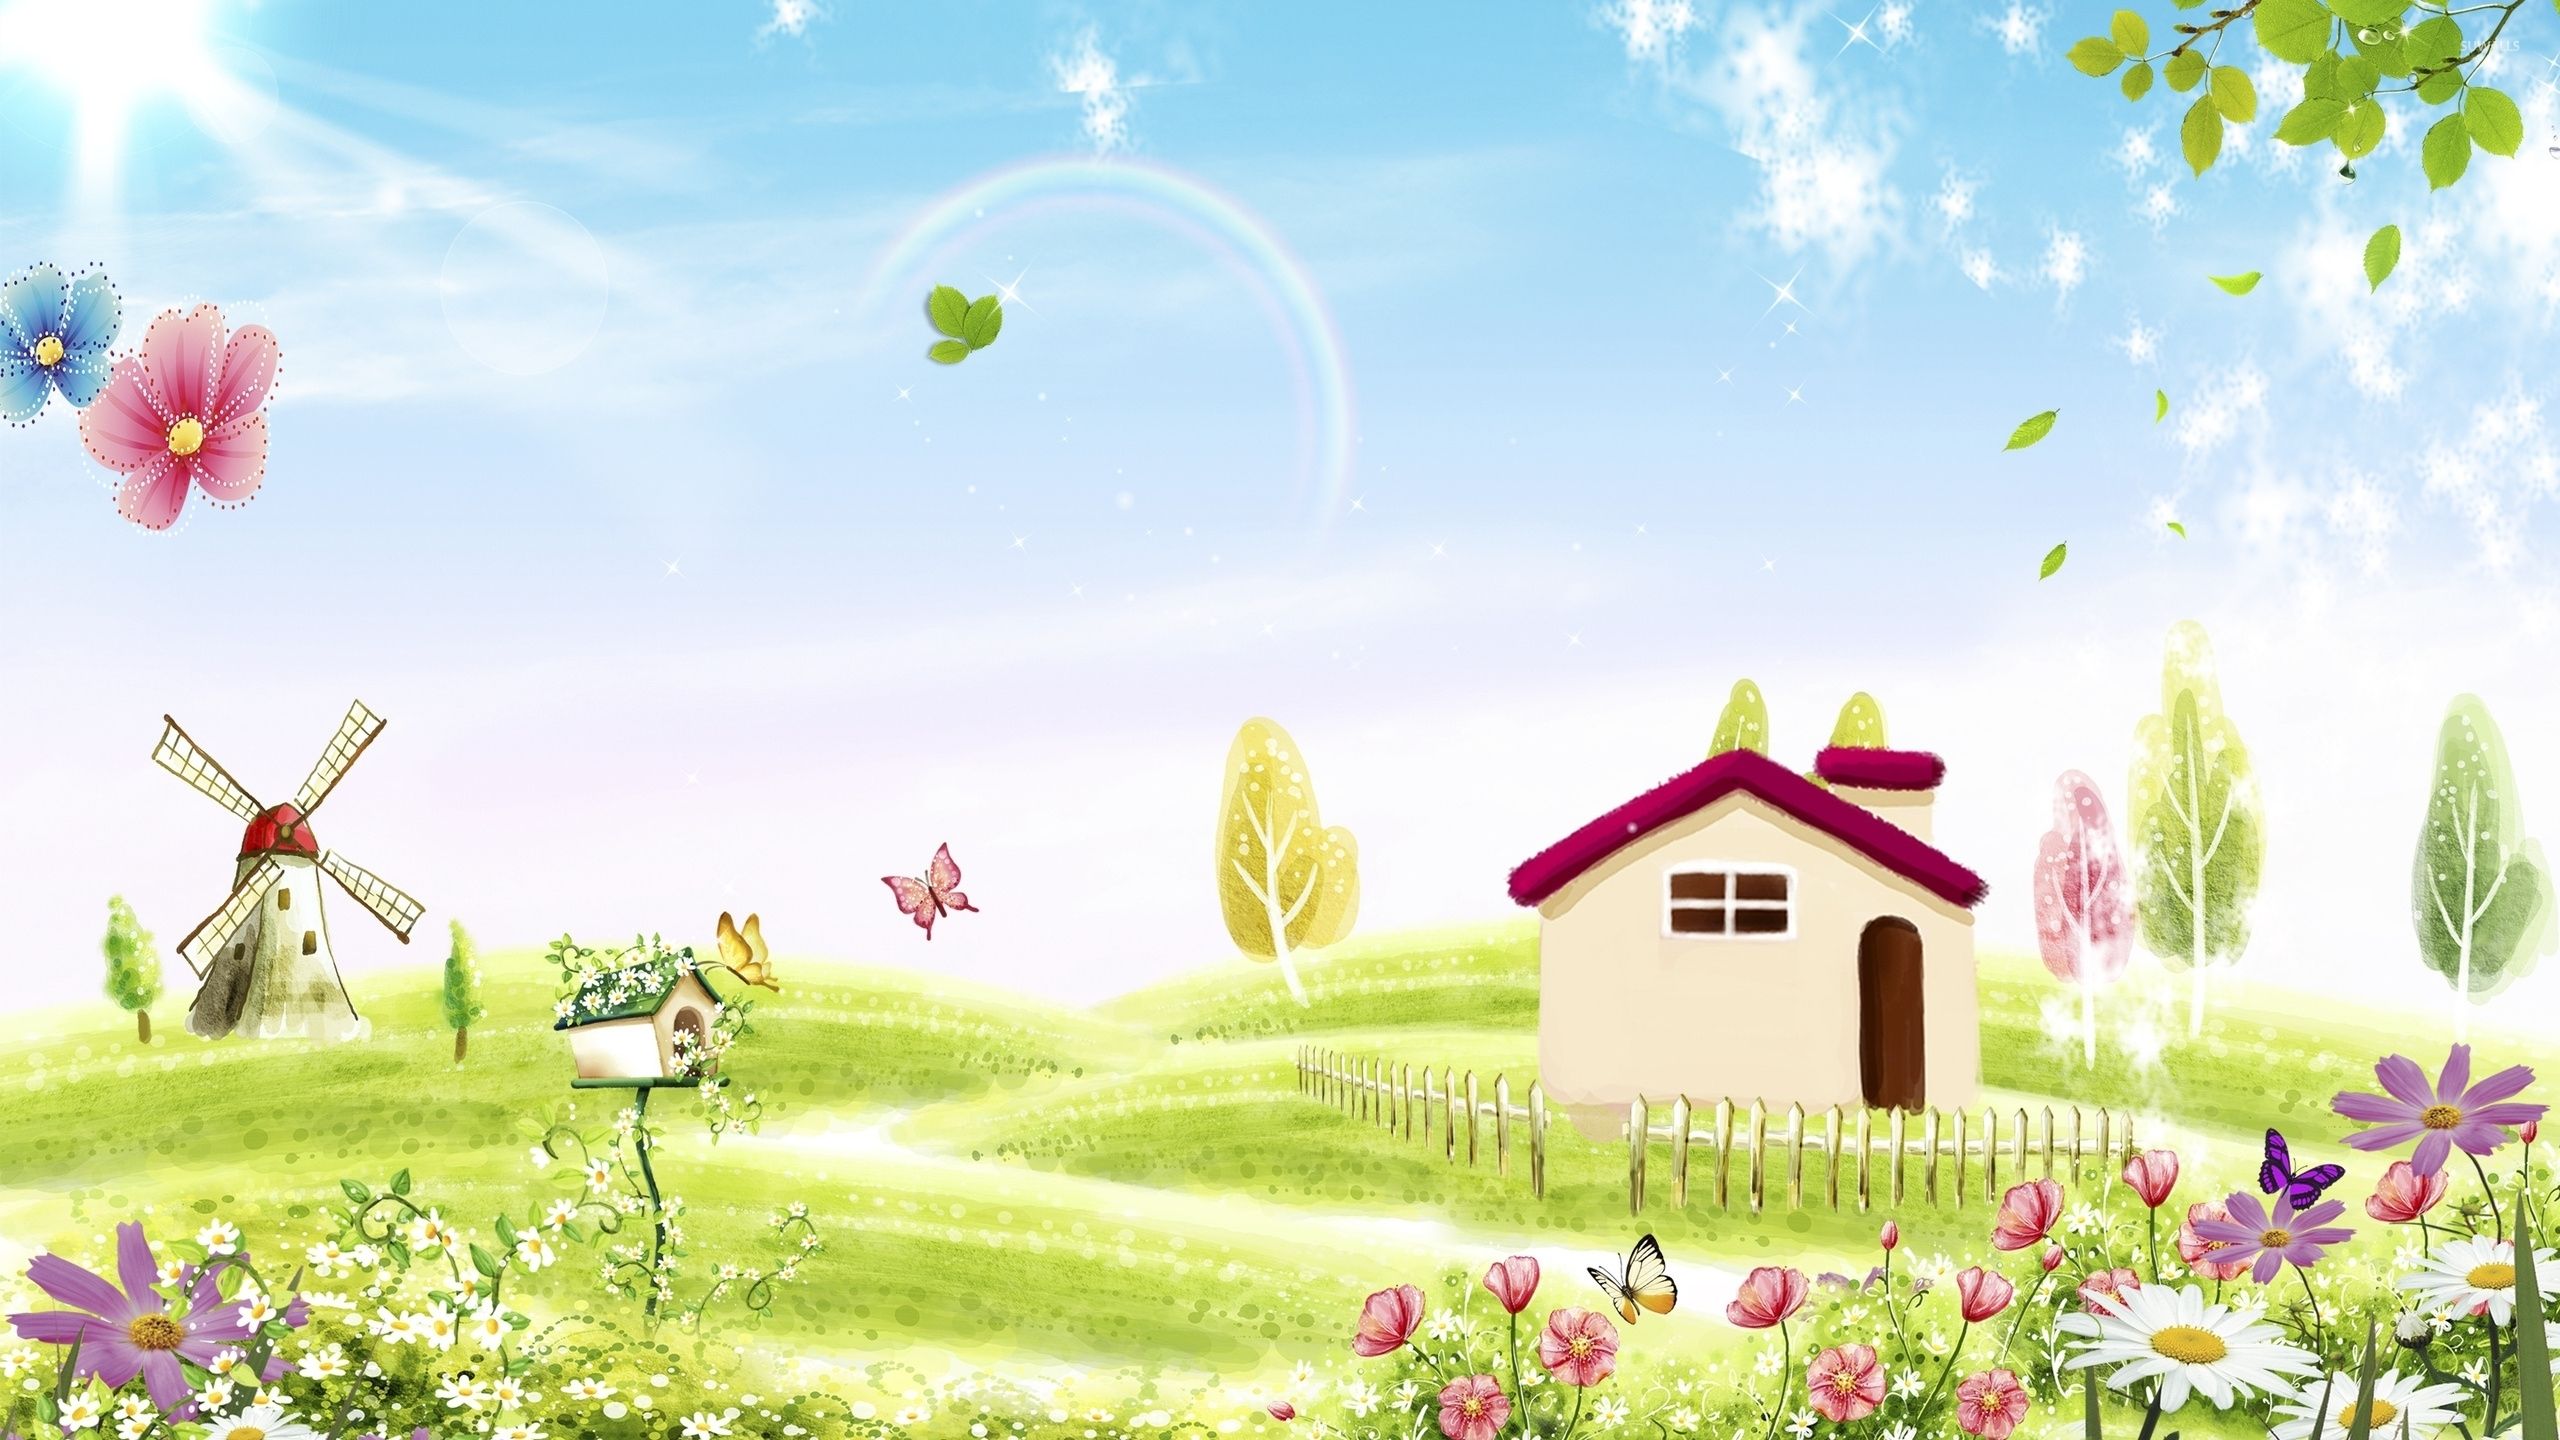 Amazing spring nature by the small house wallpaper Art